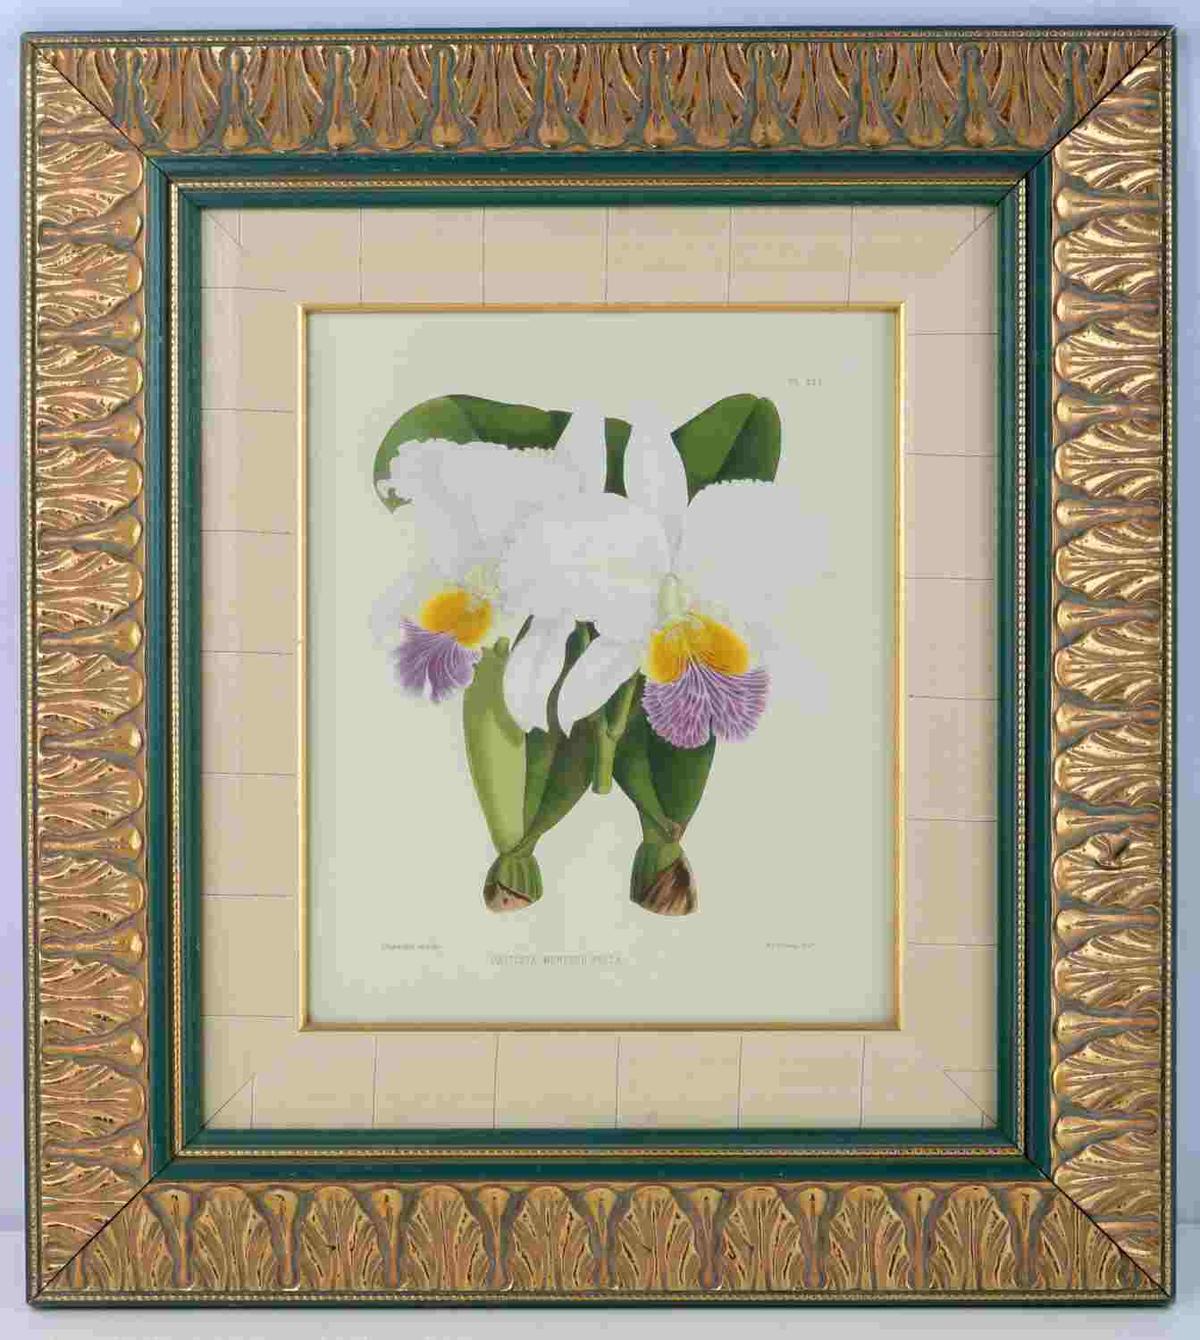 BOMBAY PRIVATE COLLECTION ORCHID PRINT JOHN FITCH